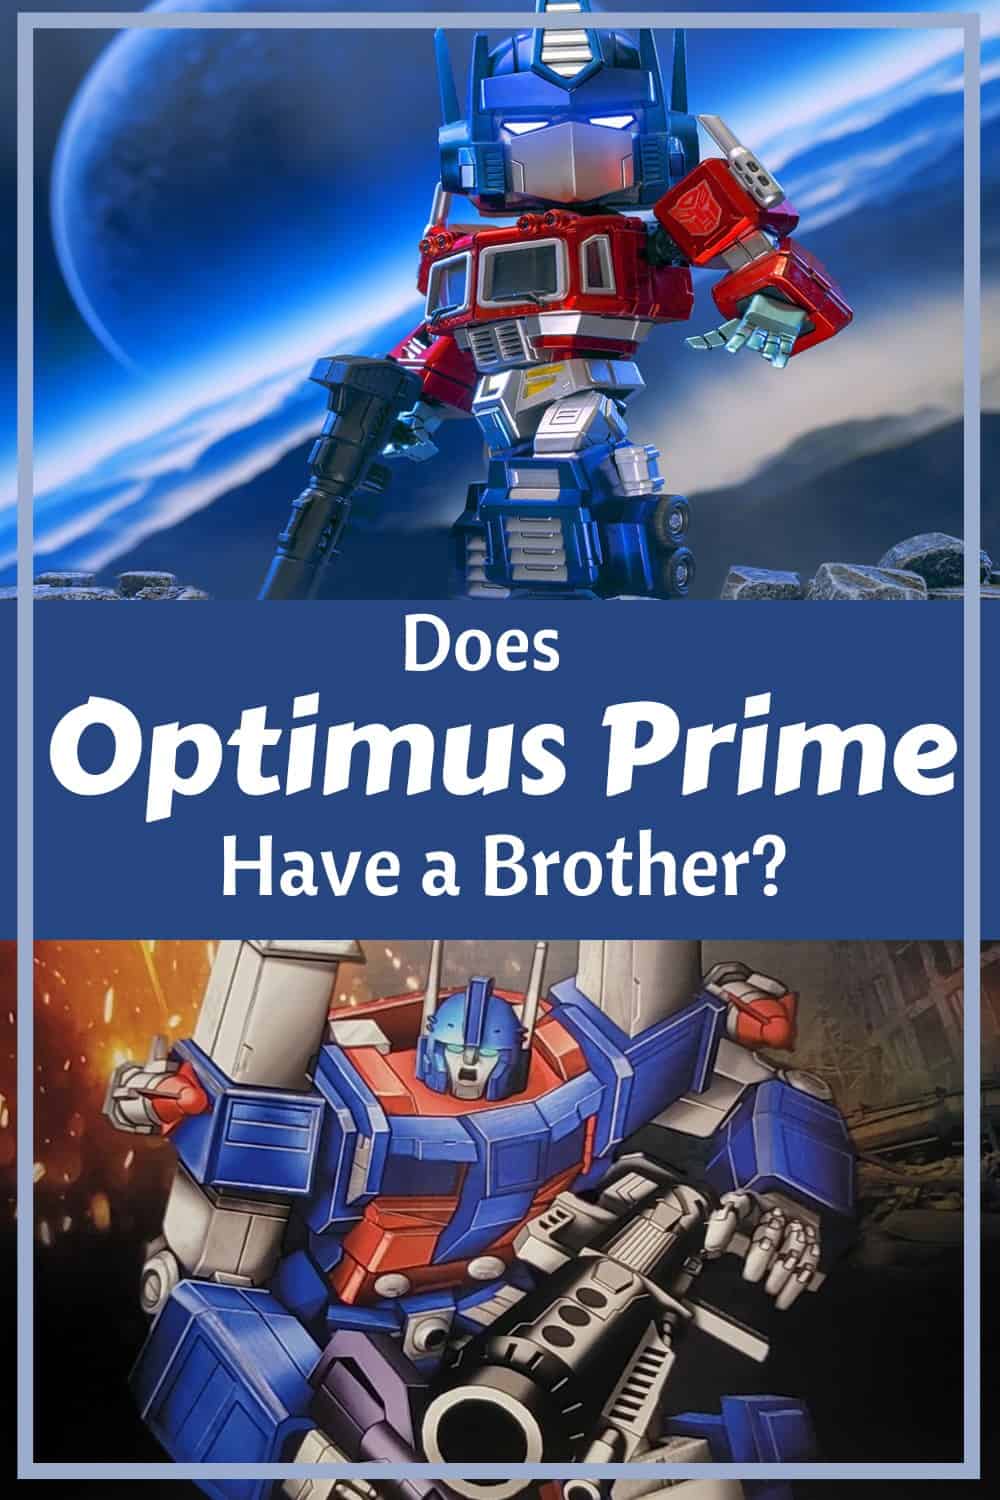 Ultra Magnus is the brother of Optimus Prime